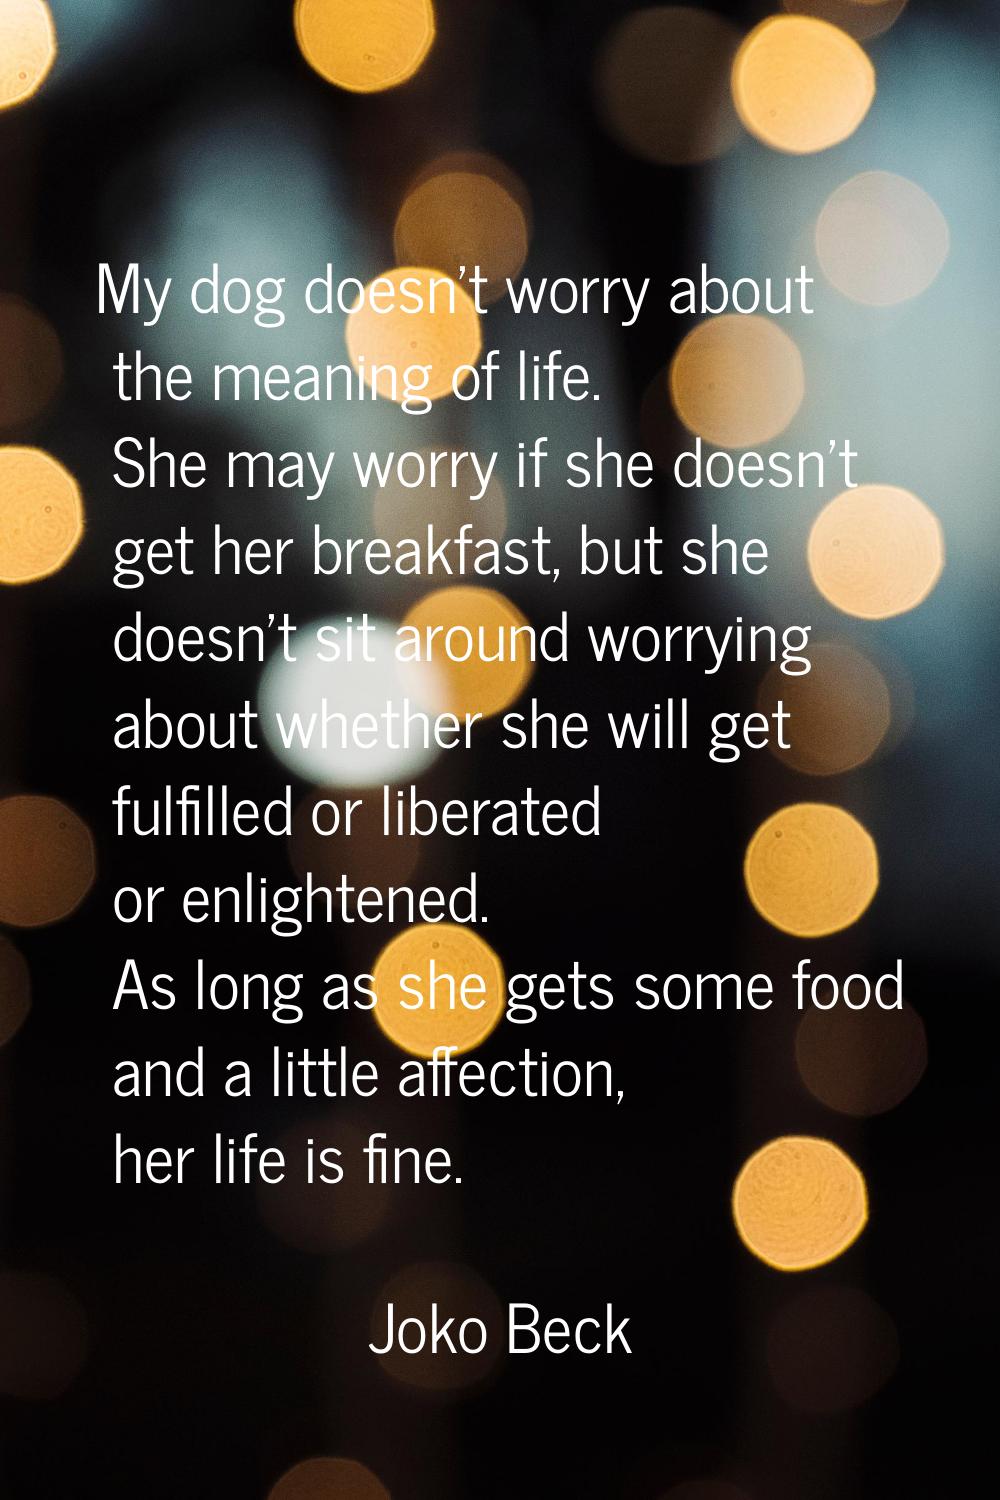 My dog doesn't worry about the meaning of life. She may worry if she doesn't get her breakfast, but